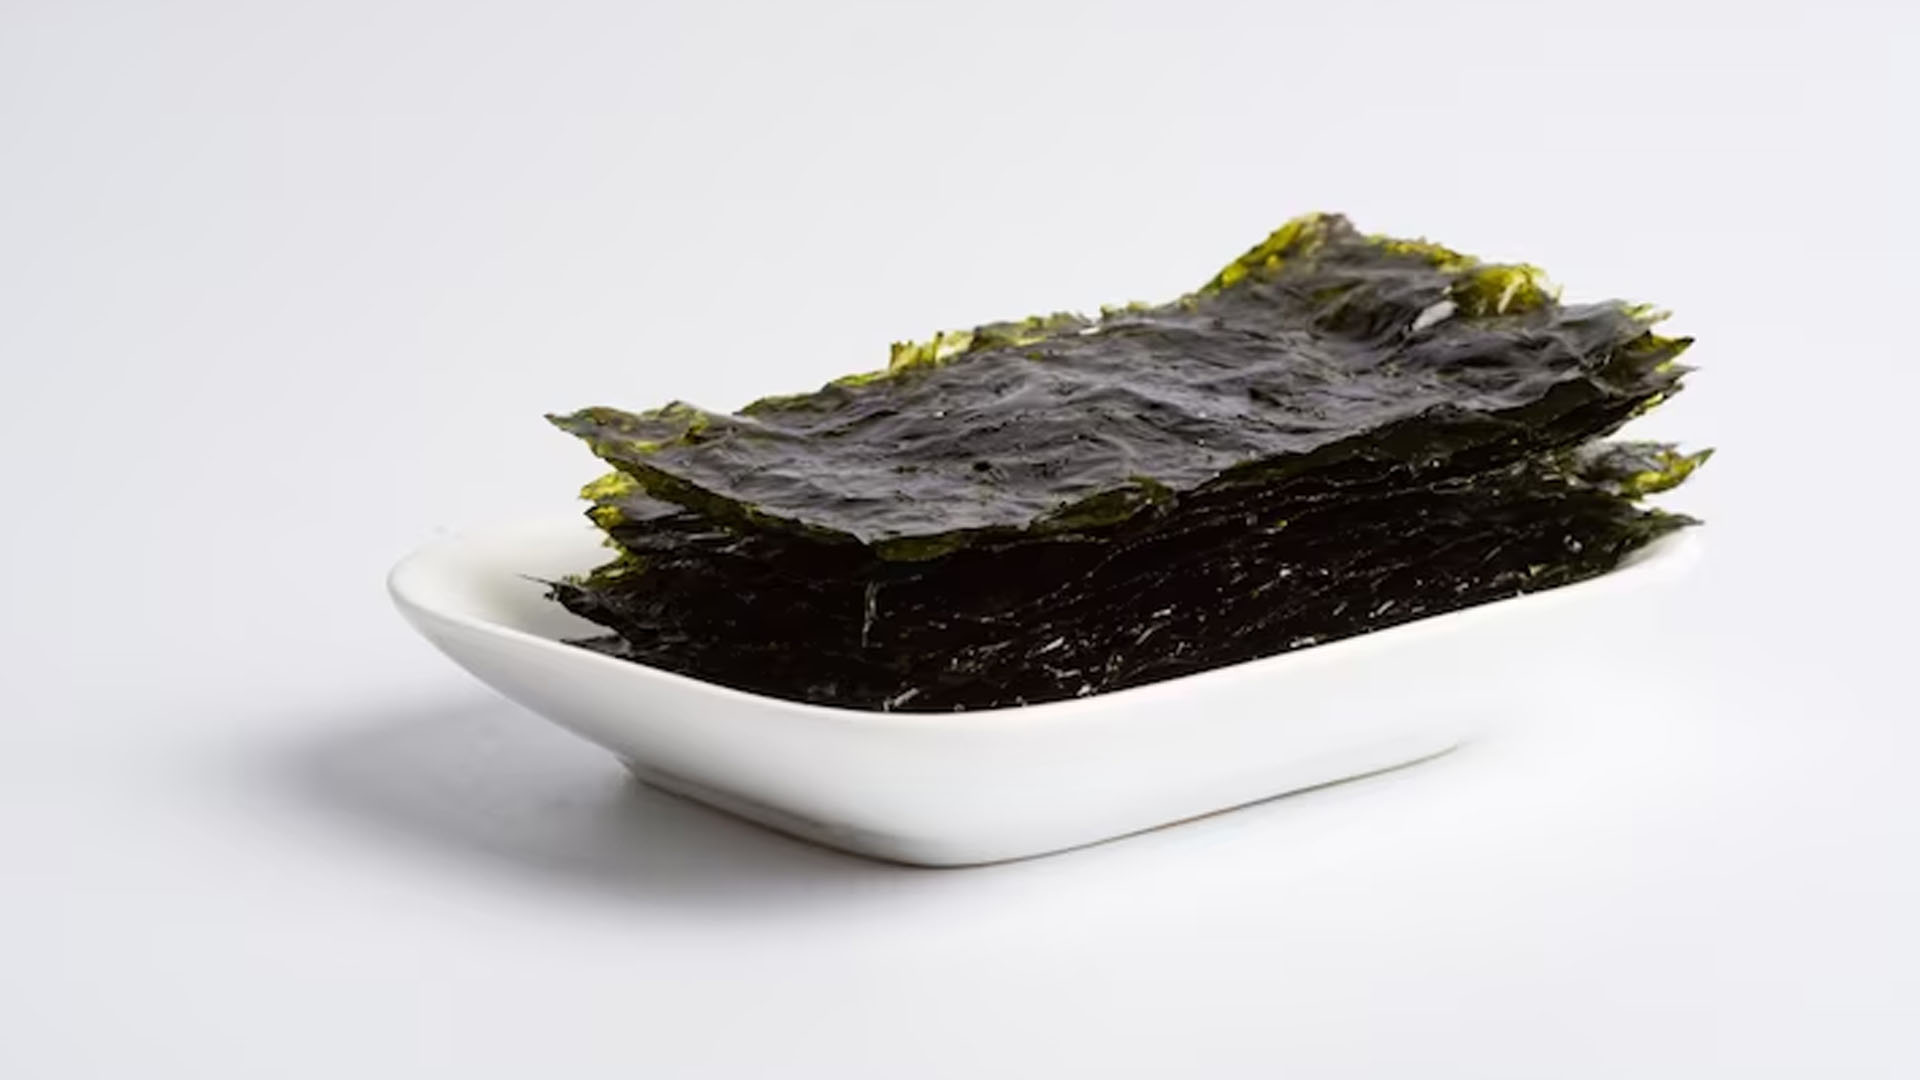 What Are The Health Benefits of Eating Dried Seaweed?